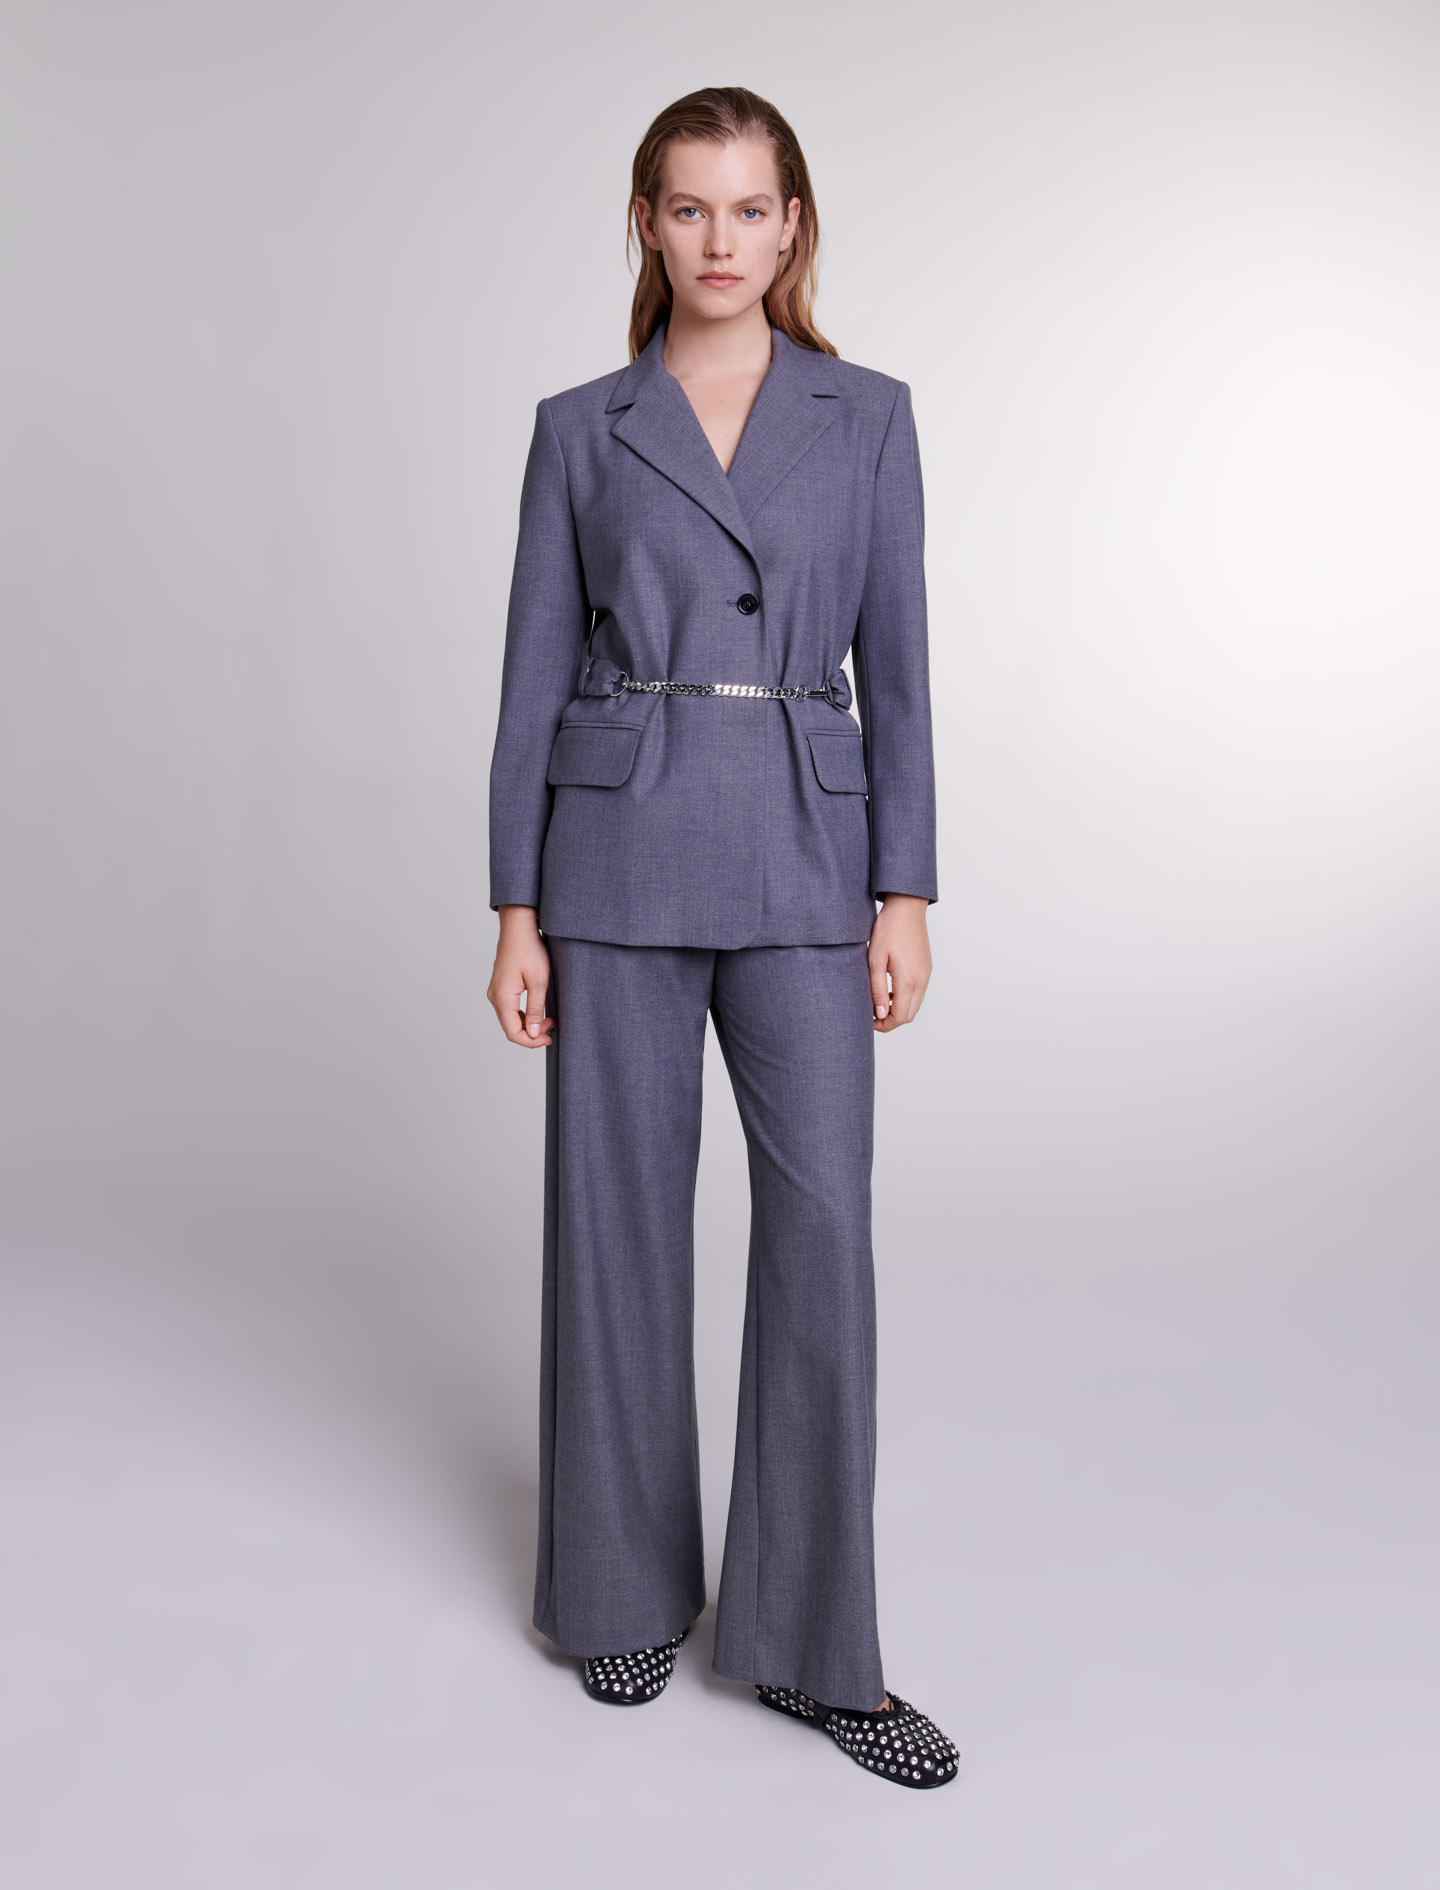 Maje Woman's polyester, Suit jacket with chain belt for Spring/Summer, in color Grey / Grey